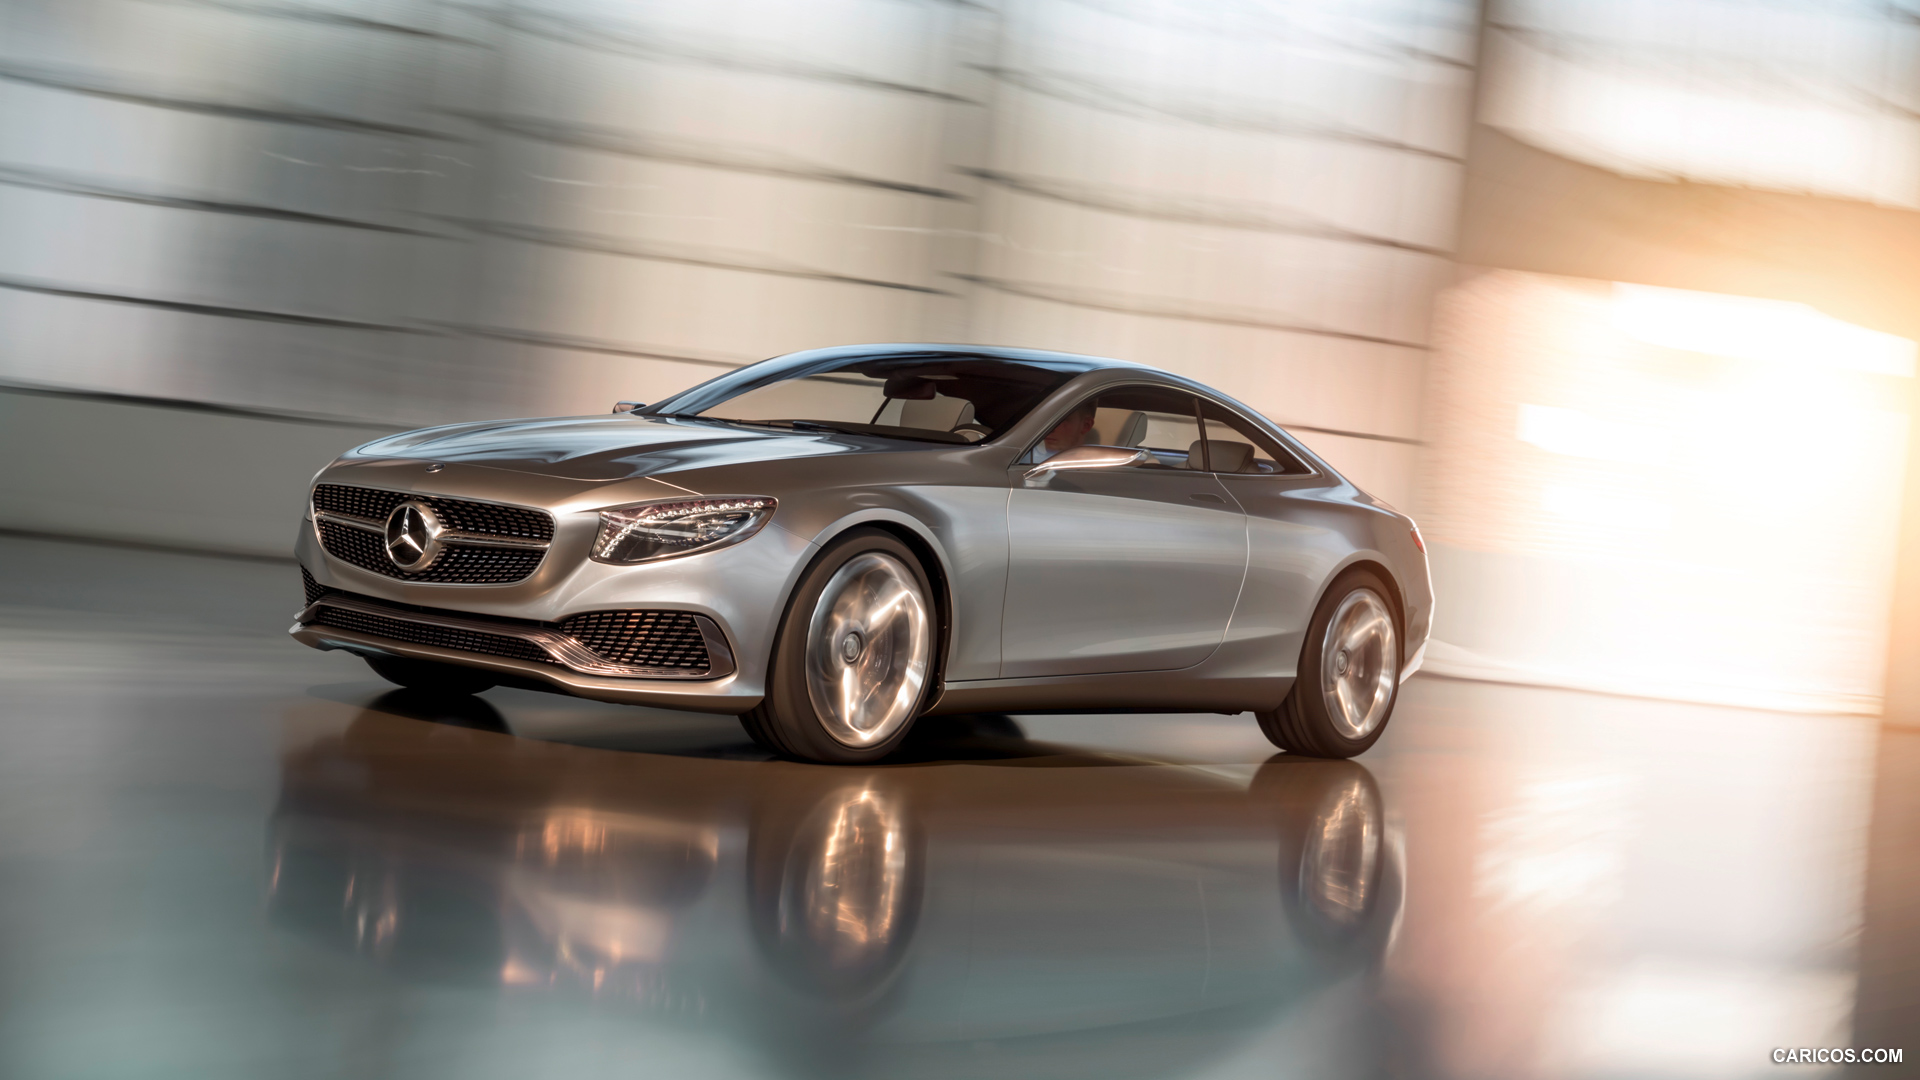 Mercedes-Benz S-Class Coupe Concept (2013)  - Front, #2 of 58